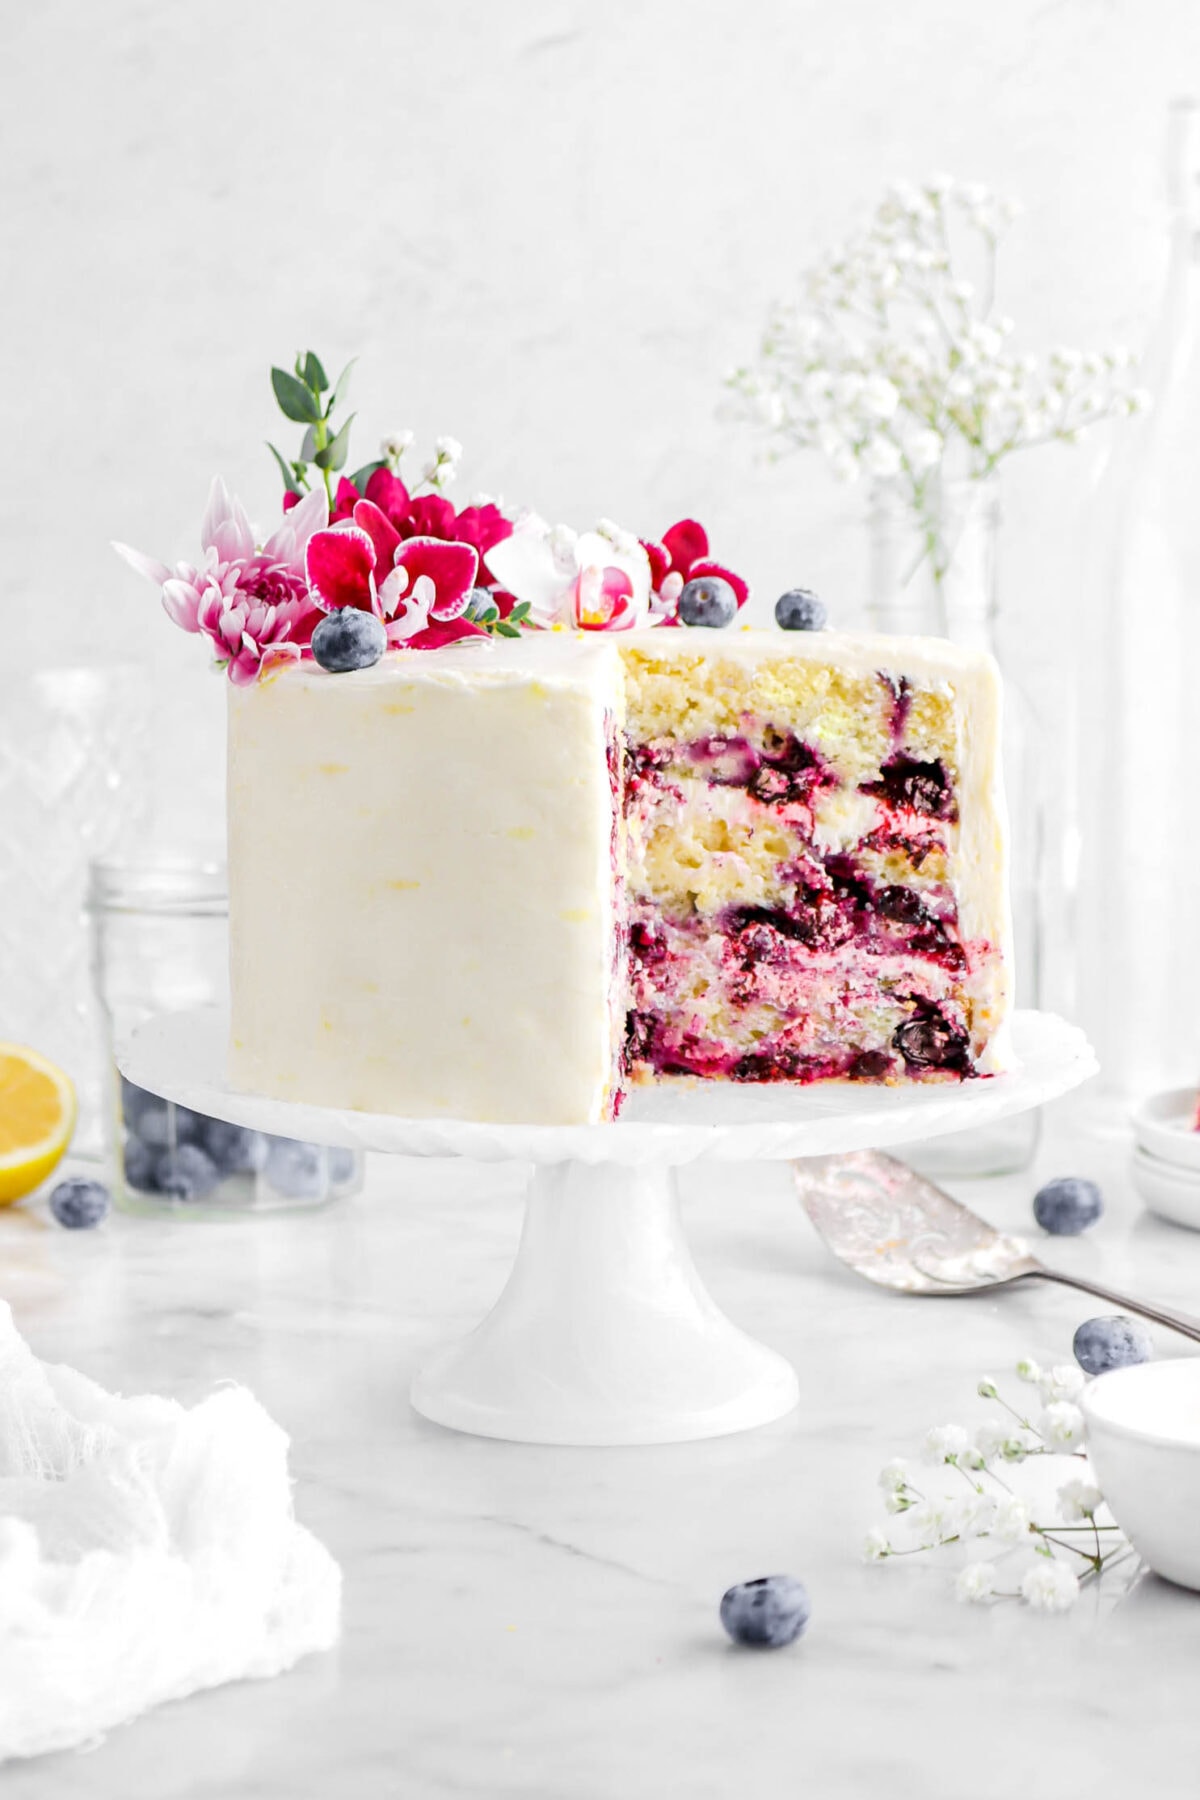 close up of cut lemon blueberry cake with blueberries and flowers on top on a white cake stand with blueberries and white flowers around on marble surface.